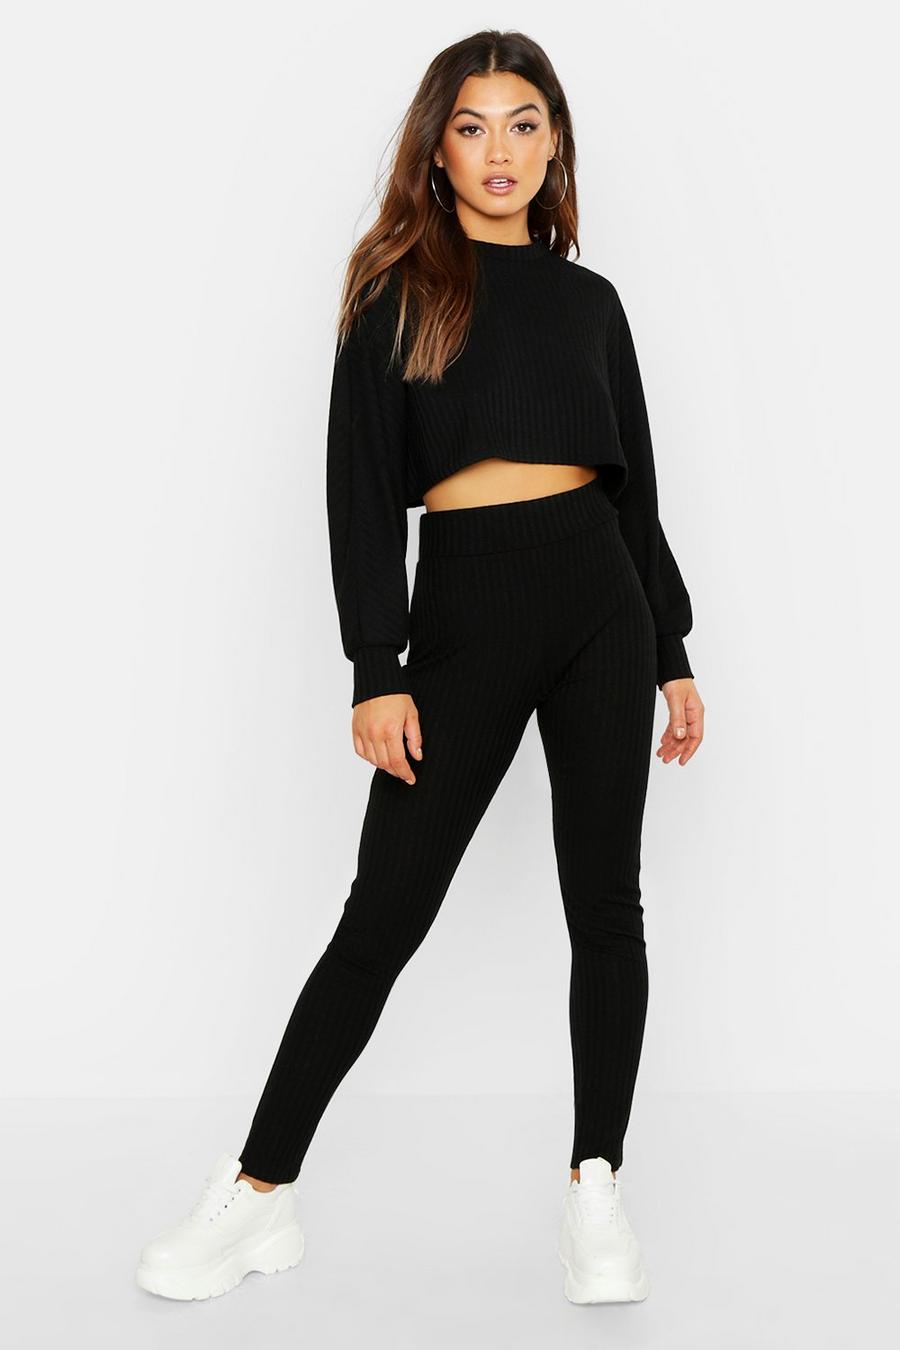 Black Rib Knitted Oversized Top And Legging Co-Ord Set image number 1